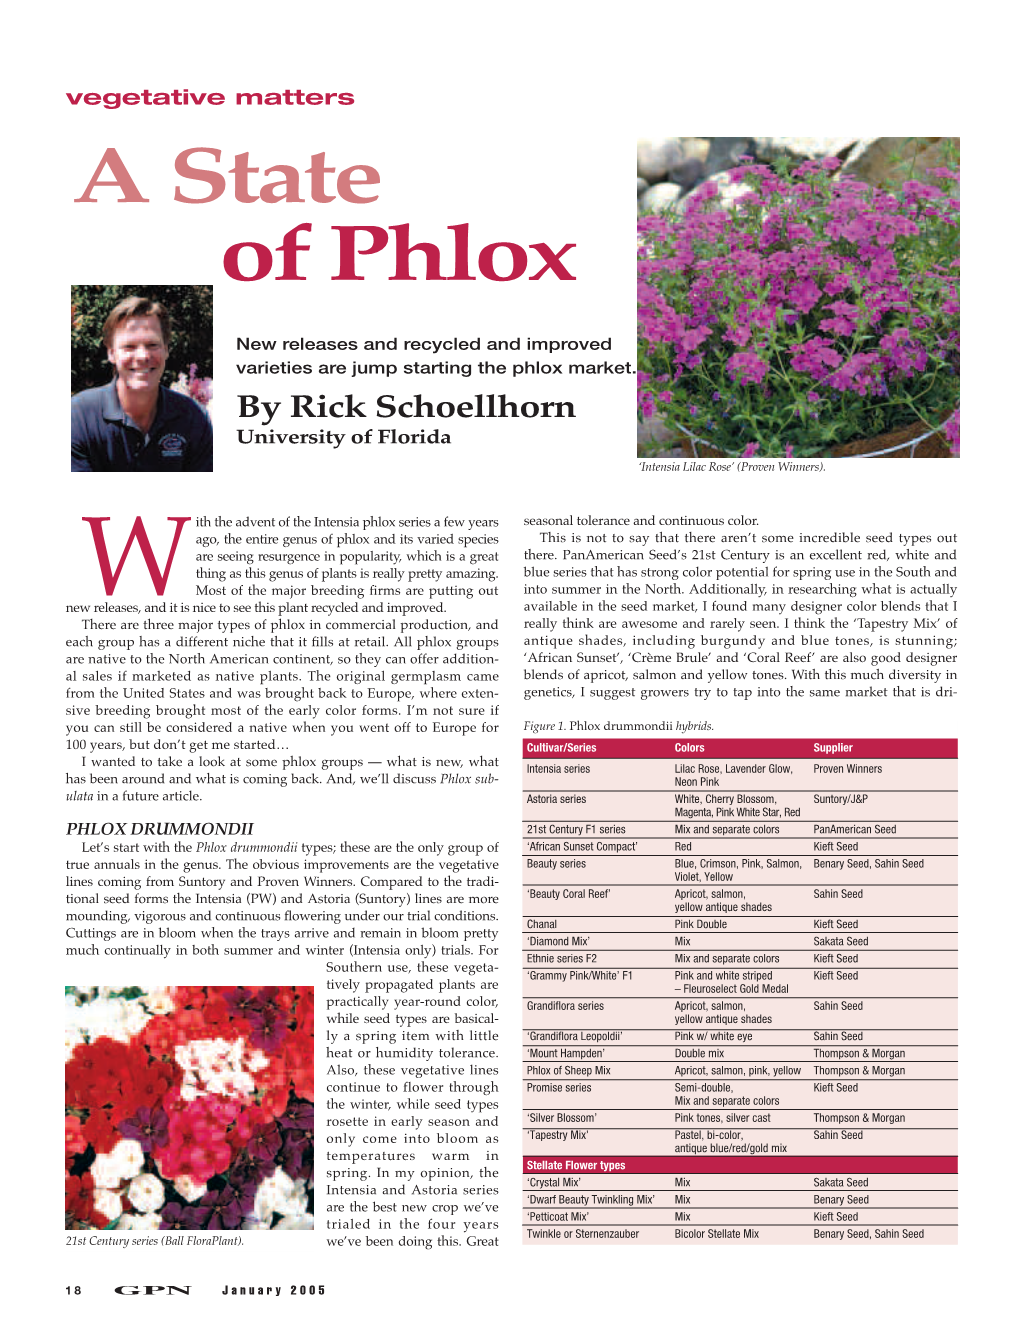 Of Phlox and Its Varied Species This Is Not to Say That There Aren’T Some Incredible Seed Types out Are Seeing Resurgence in Popularity, Which Is a Great There